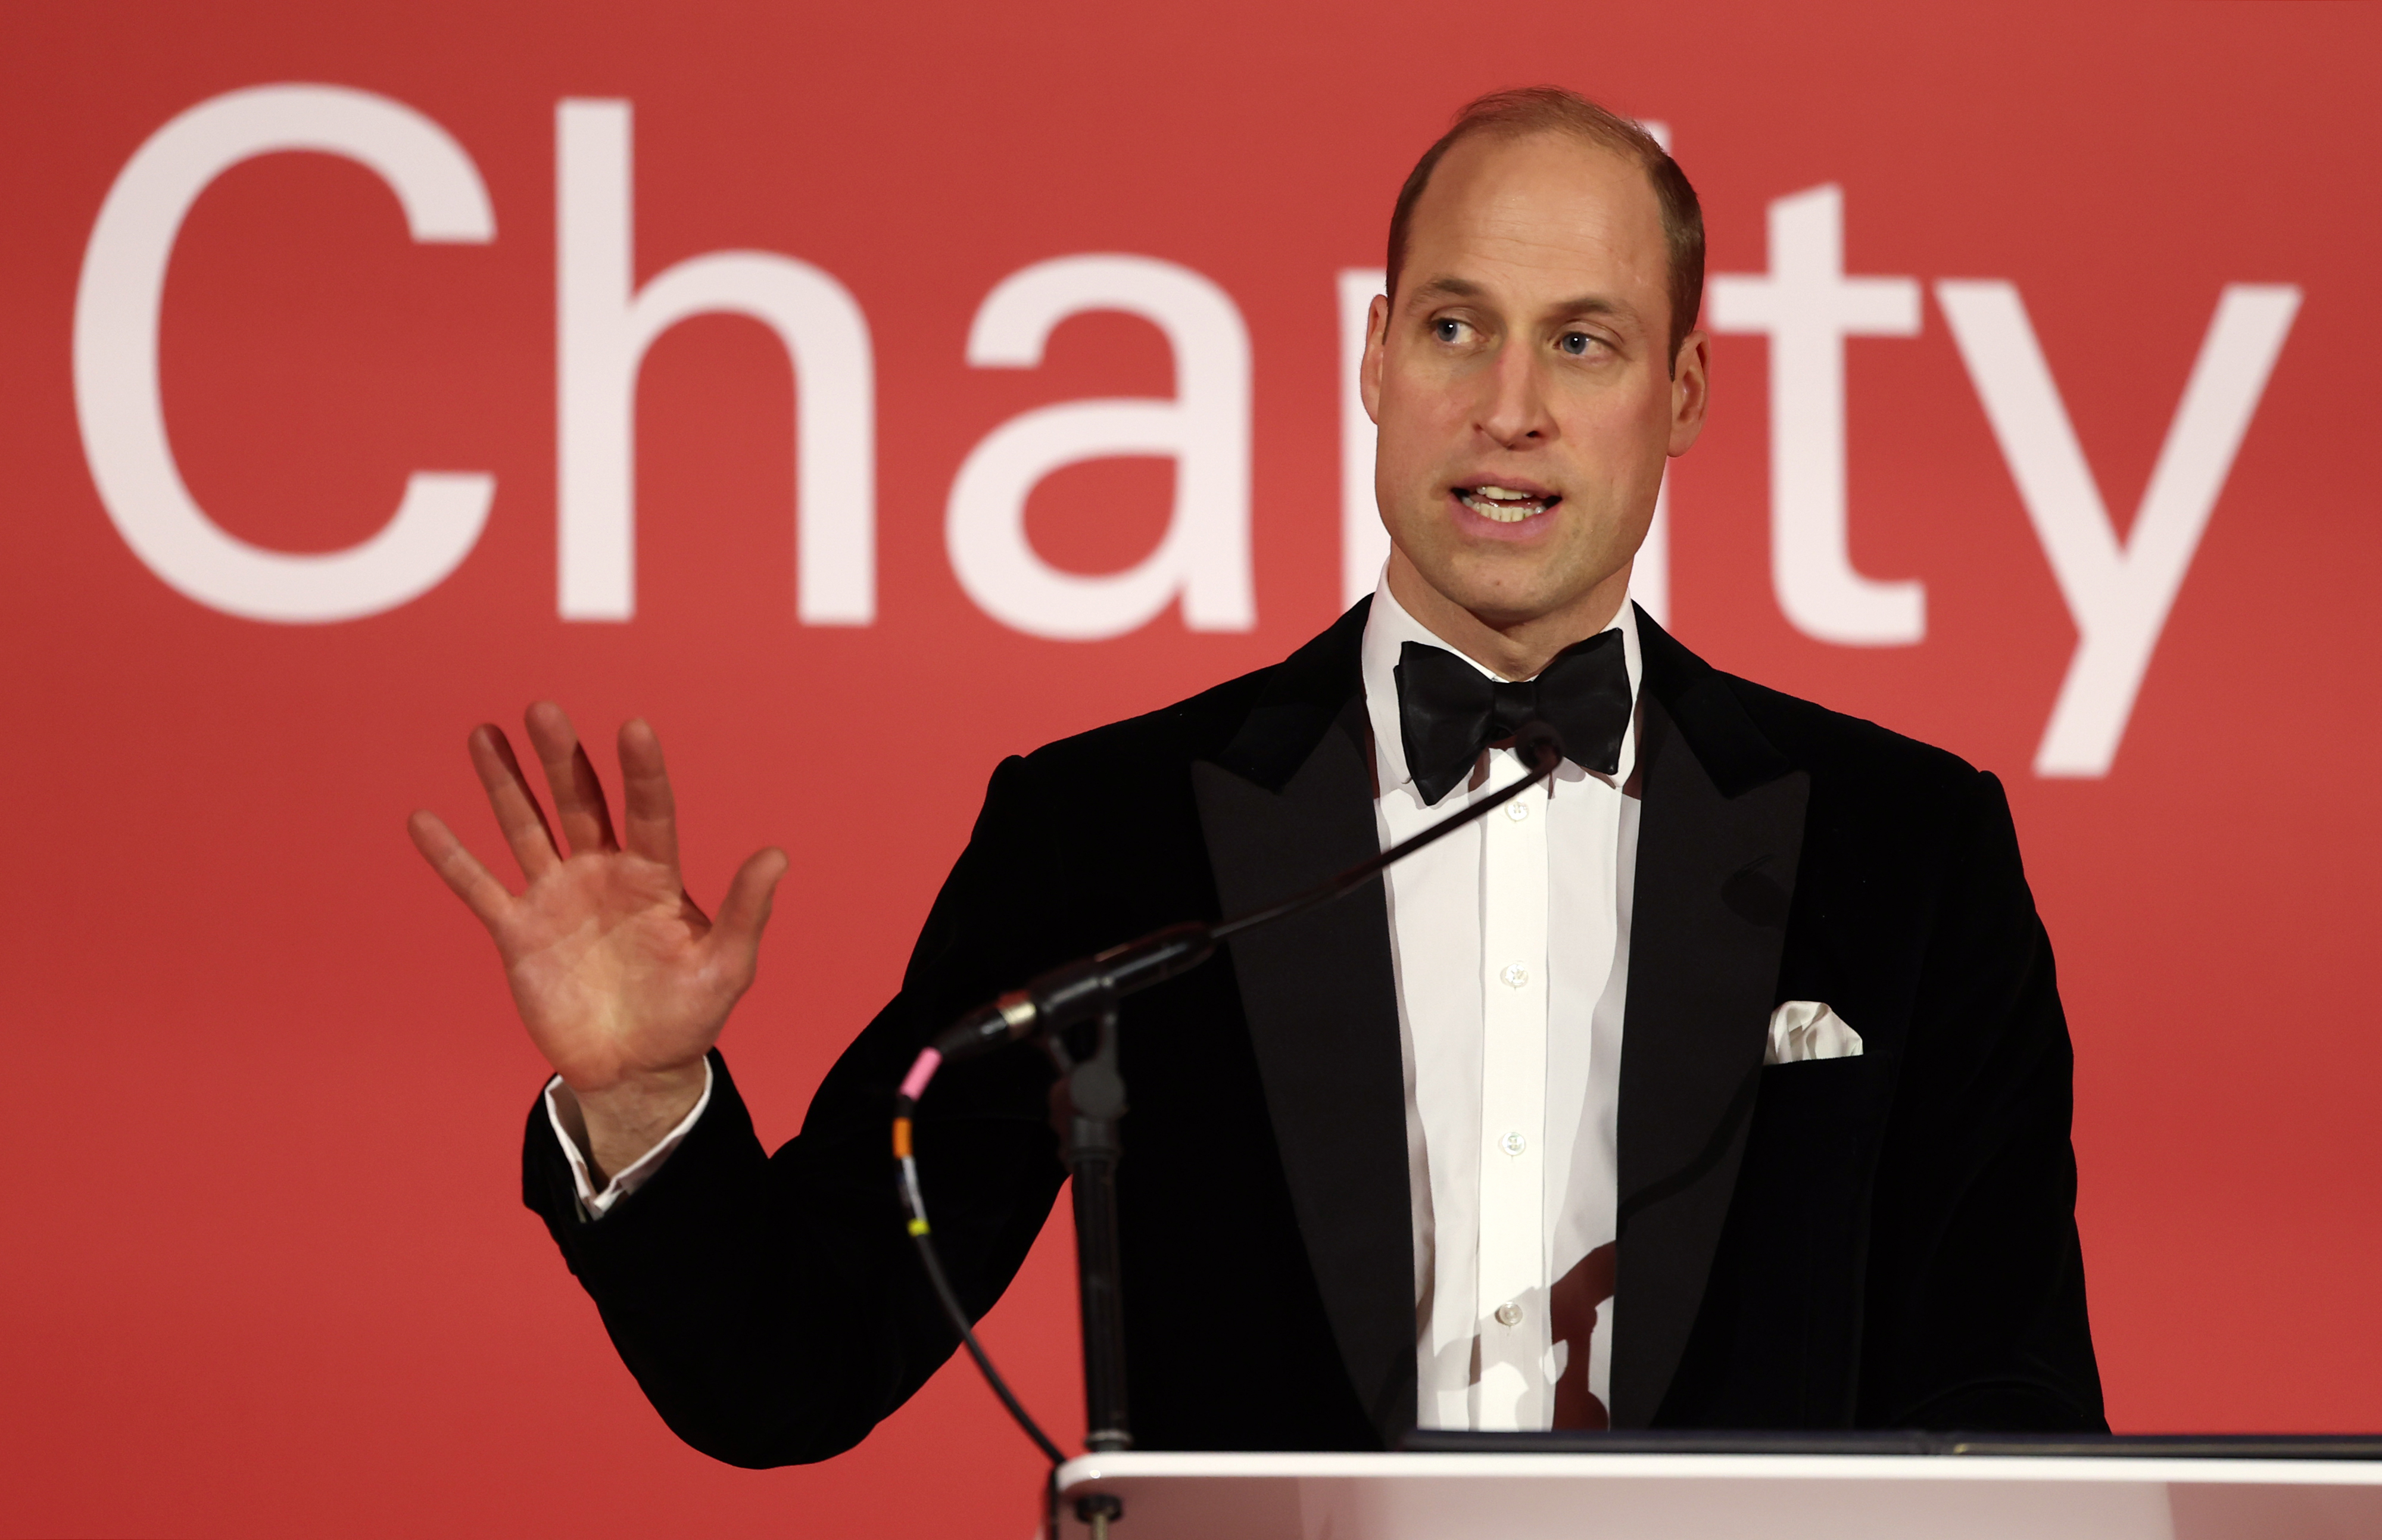 William in a tuxedo with a bow tie speaks at a podium with a &quot;Charity&quot; sign in the background